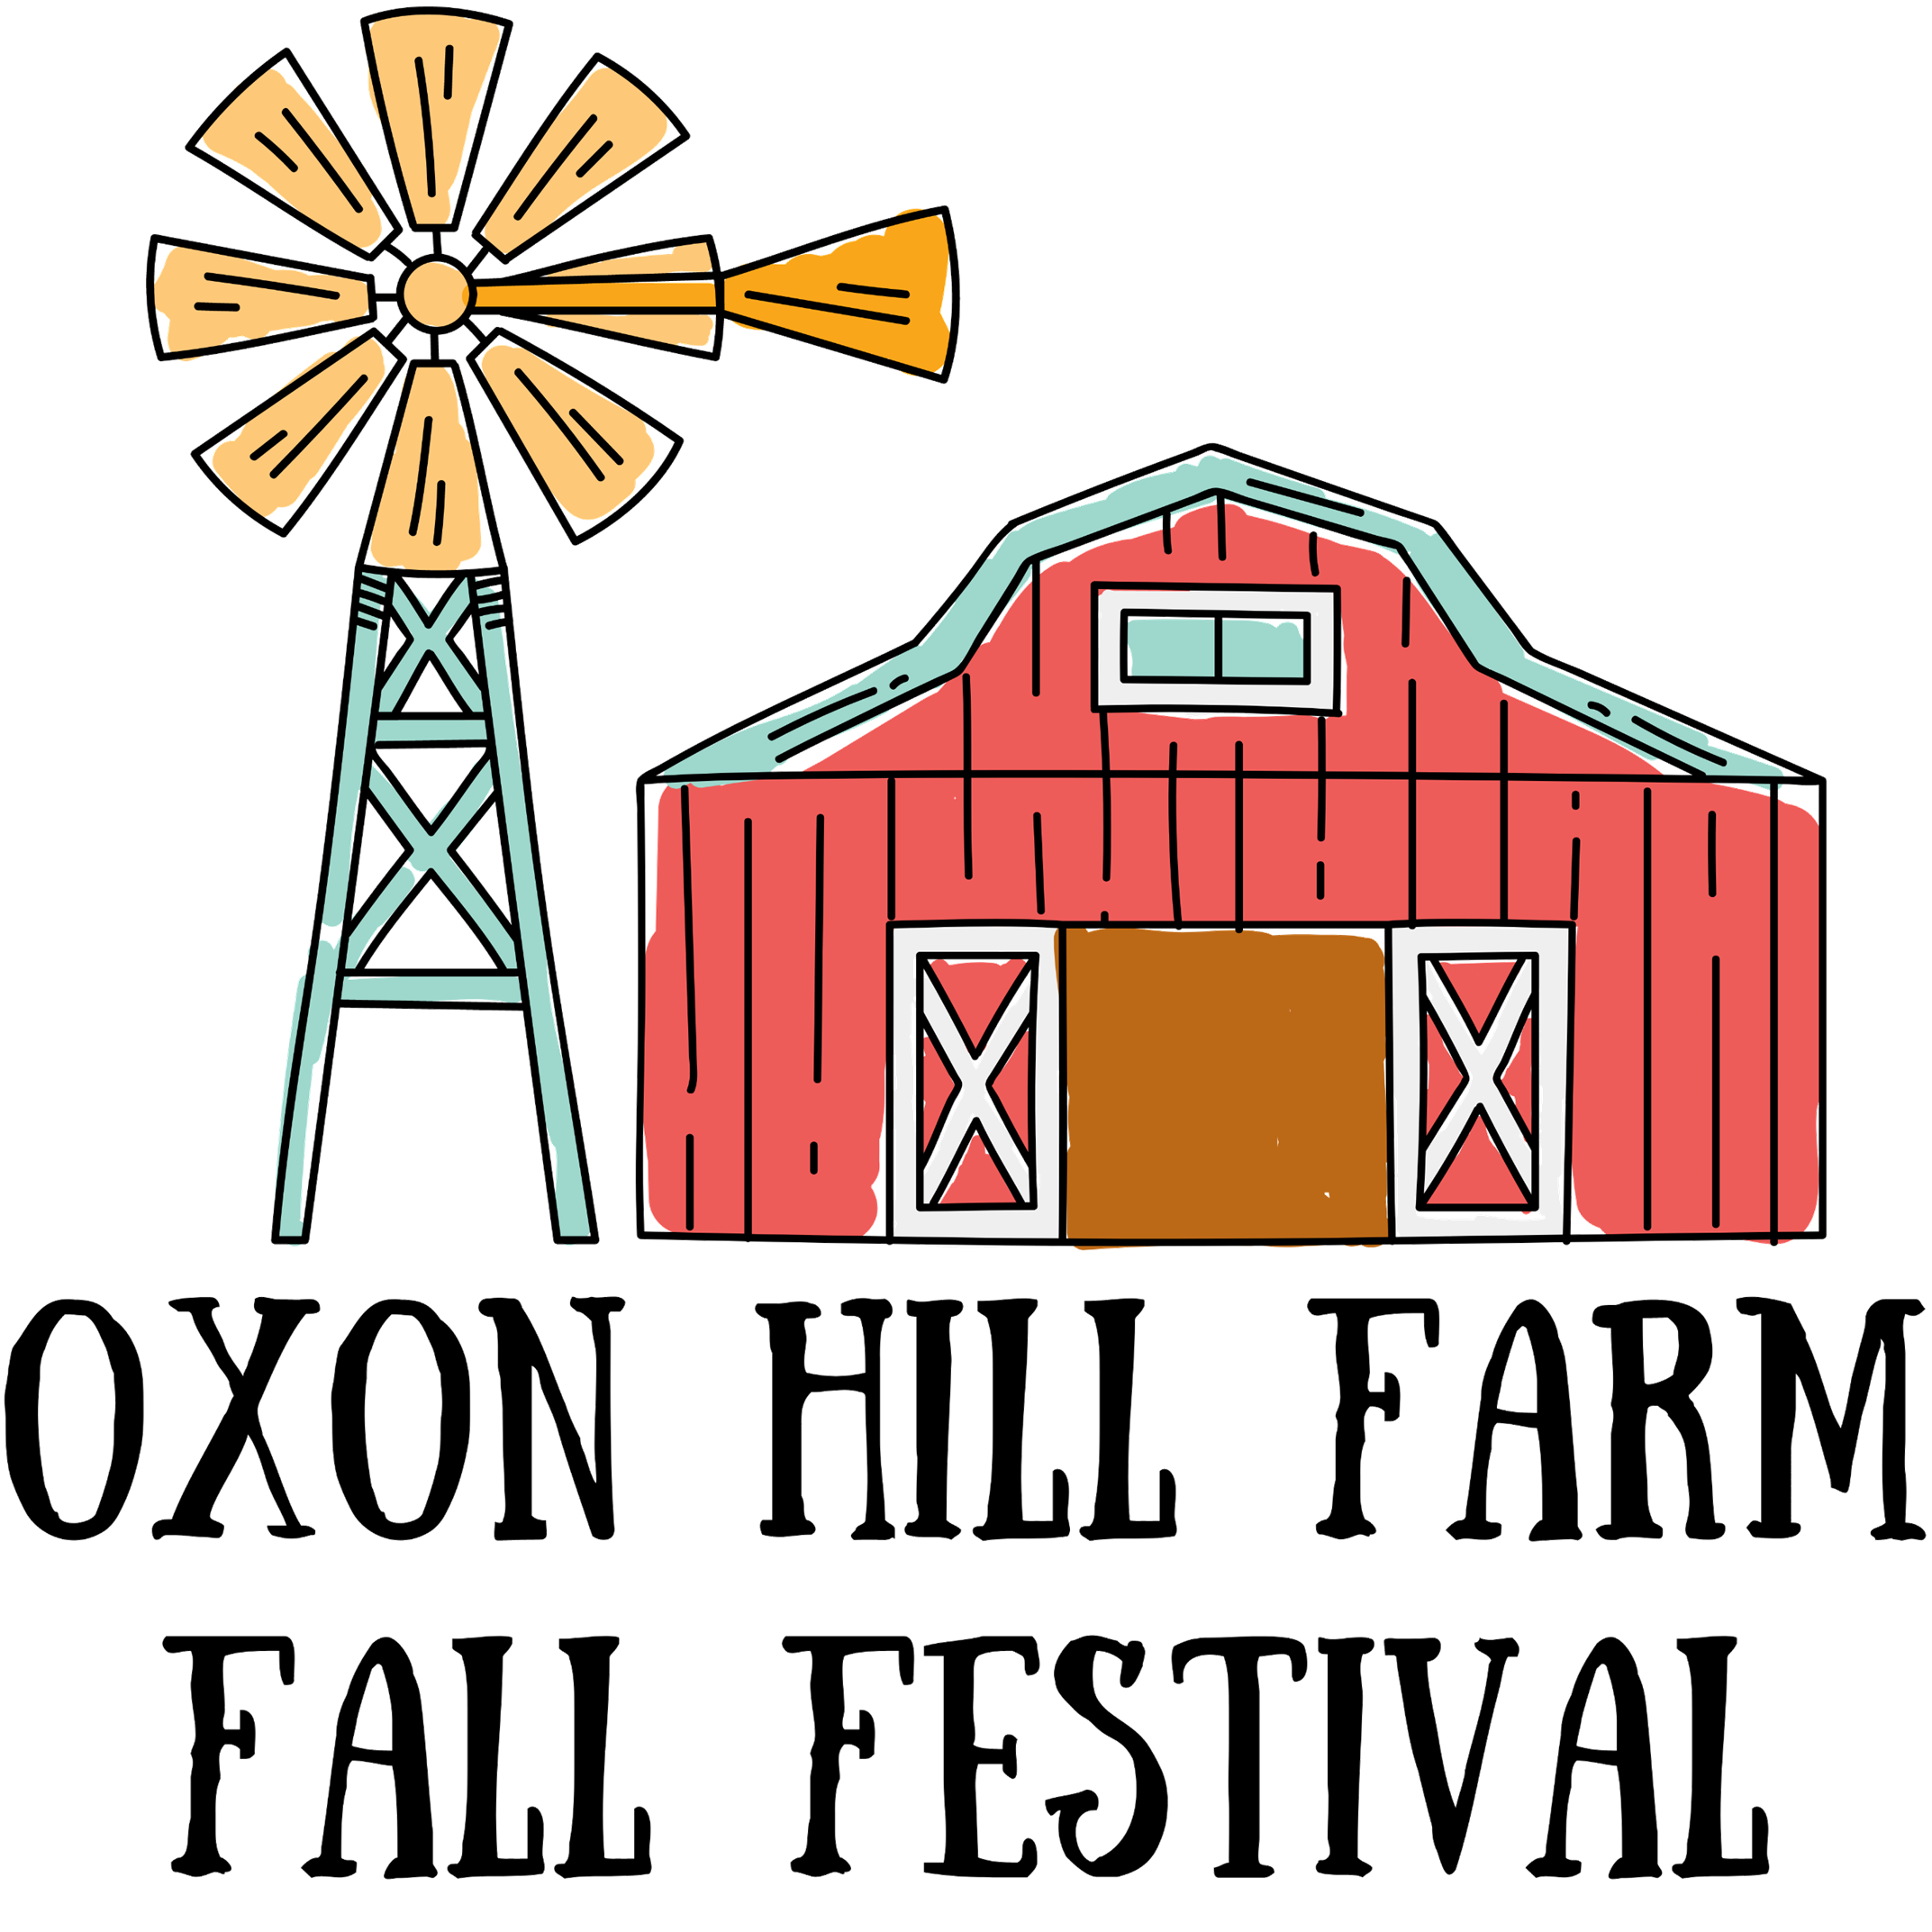 A doodle of a barn and windmill over the text "Oxon Hill Farm Fall Festival"